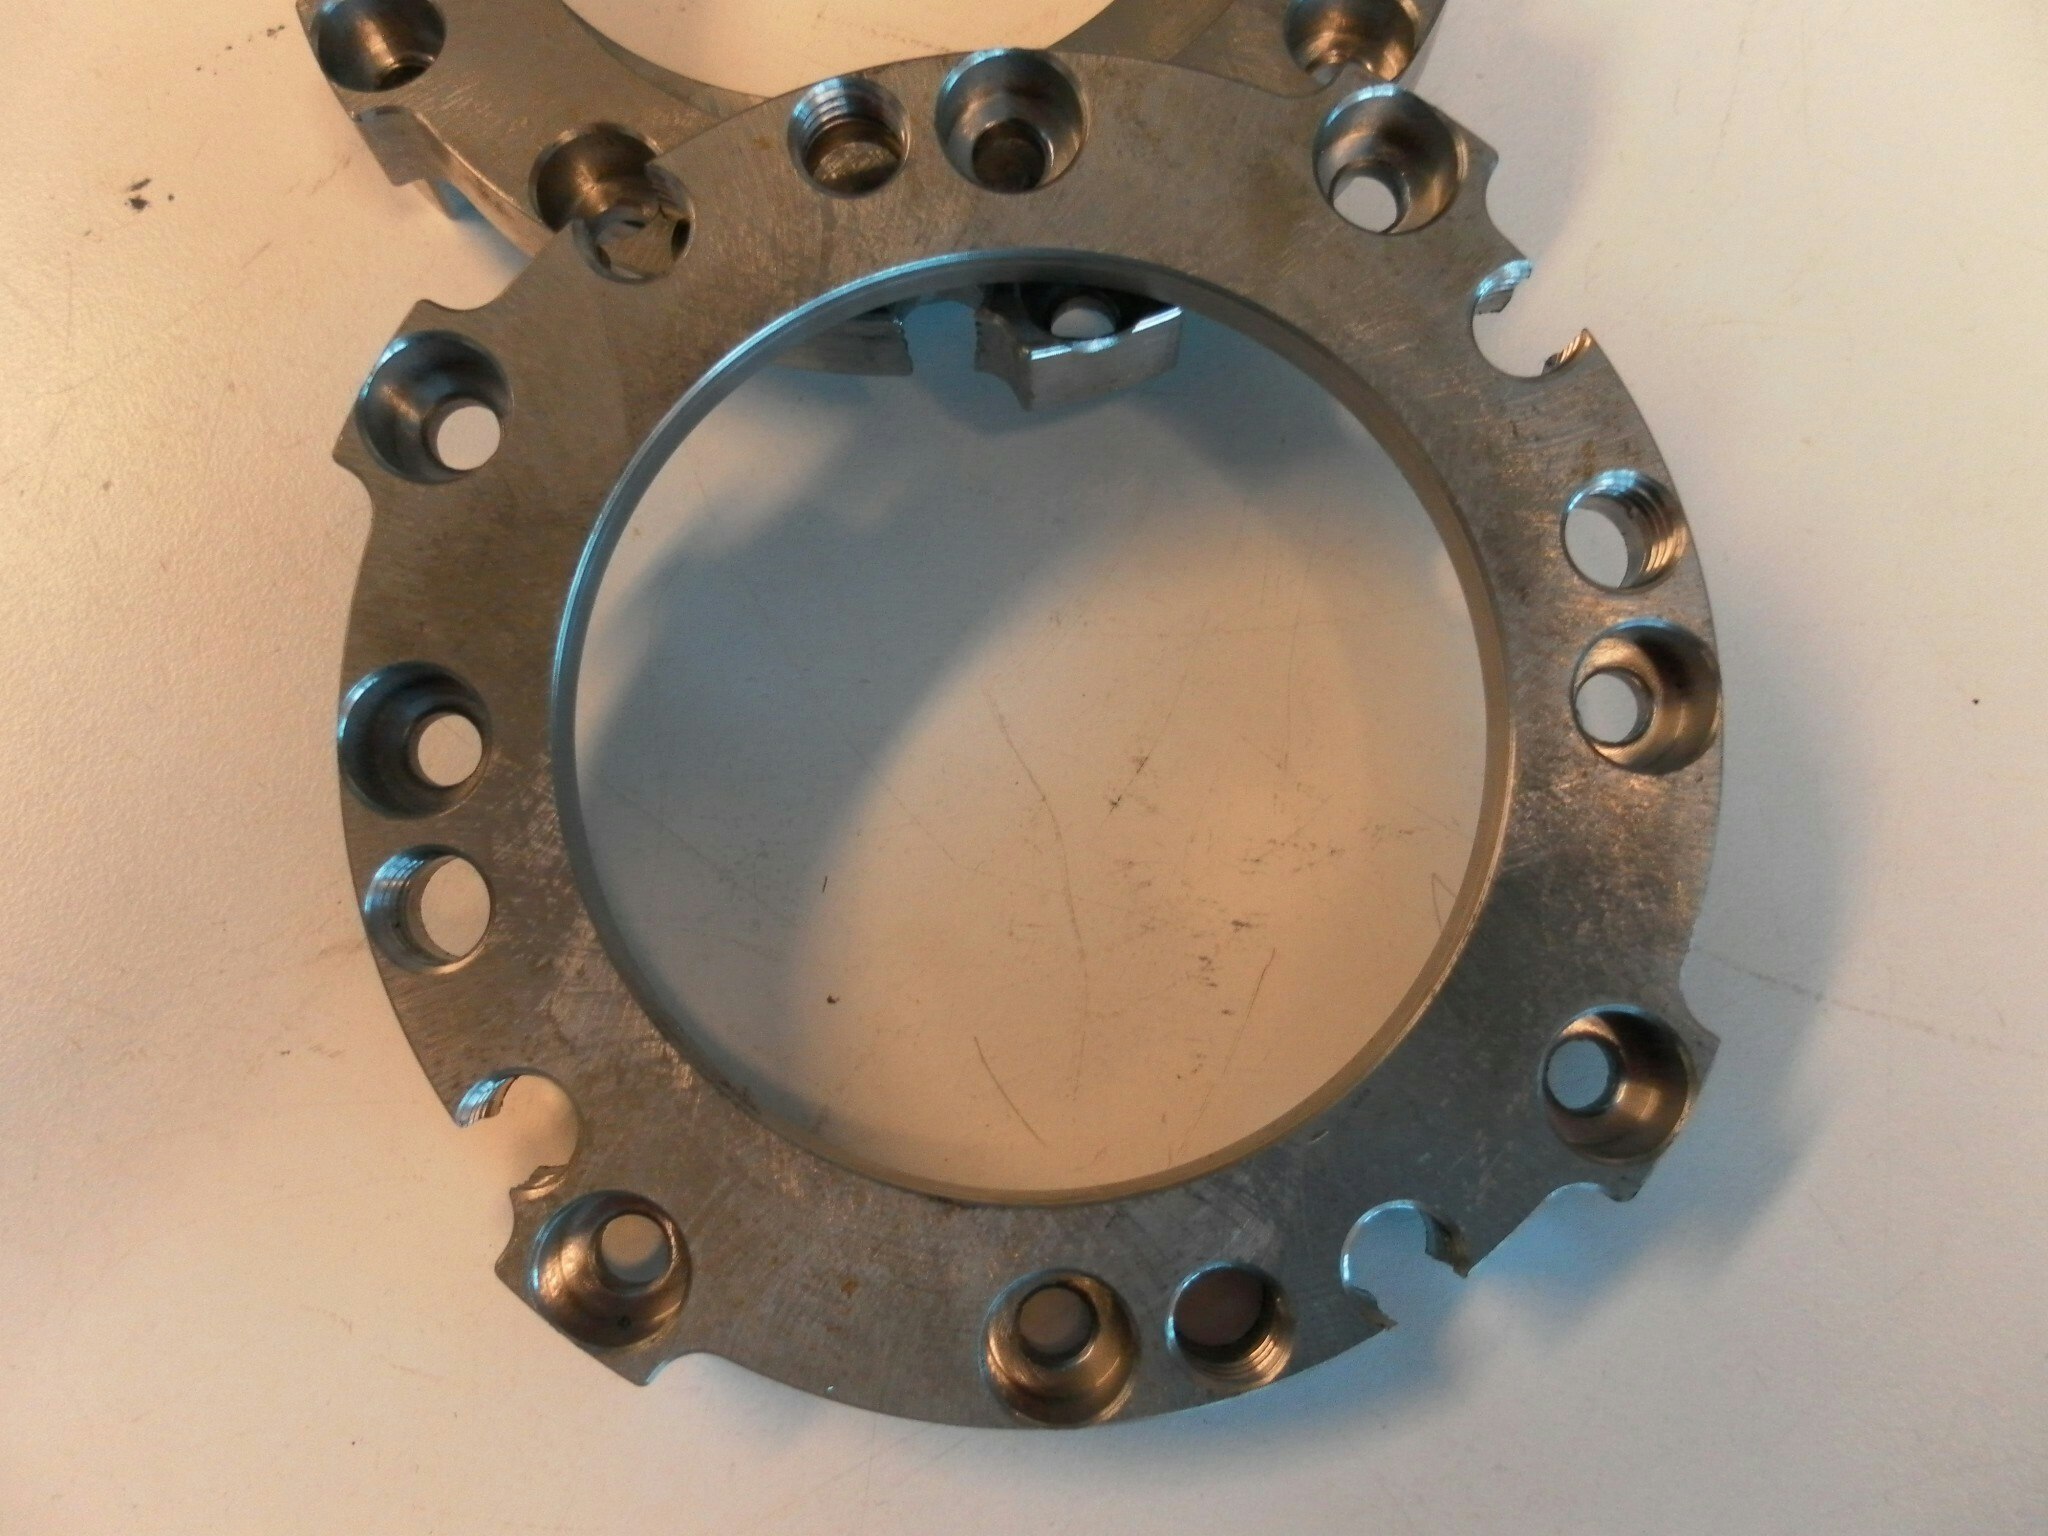 Adapter for Release Bearing for 184mm Tenaci clutch